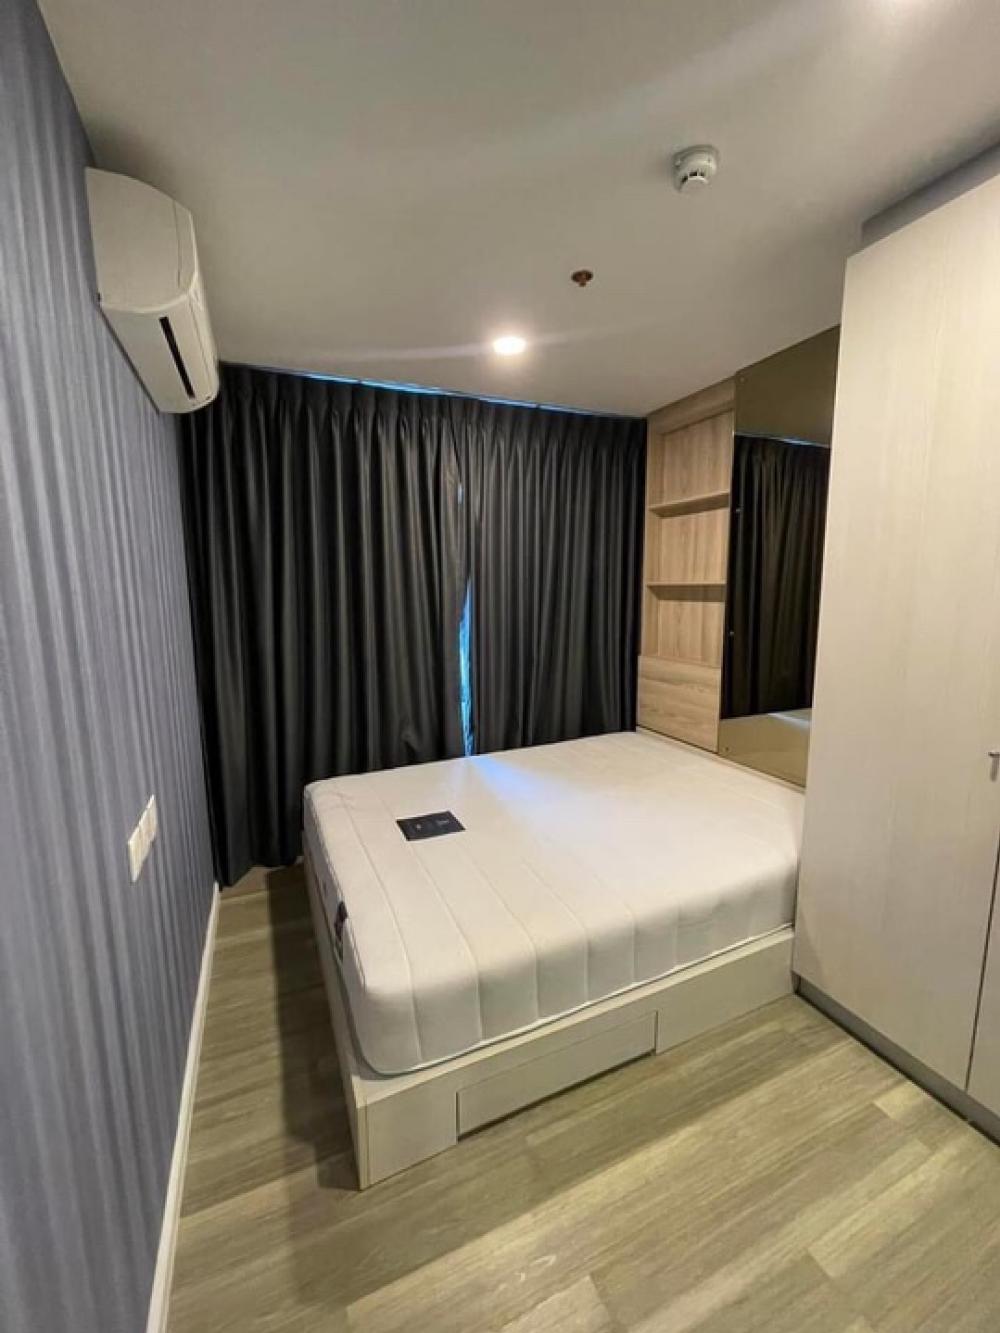 For RentCondoKasetsart, Ratchayothin : 🔥Book now, available 2/8 🔥Kensington Kaset Campus condo for rent, 2 bedrooms, beautifully decorated, great value Line: @livingperfect